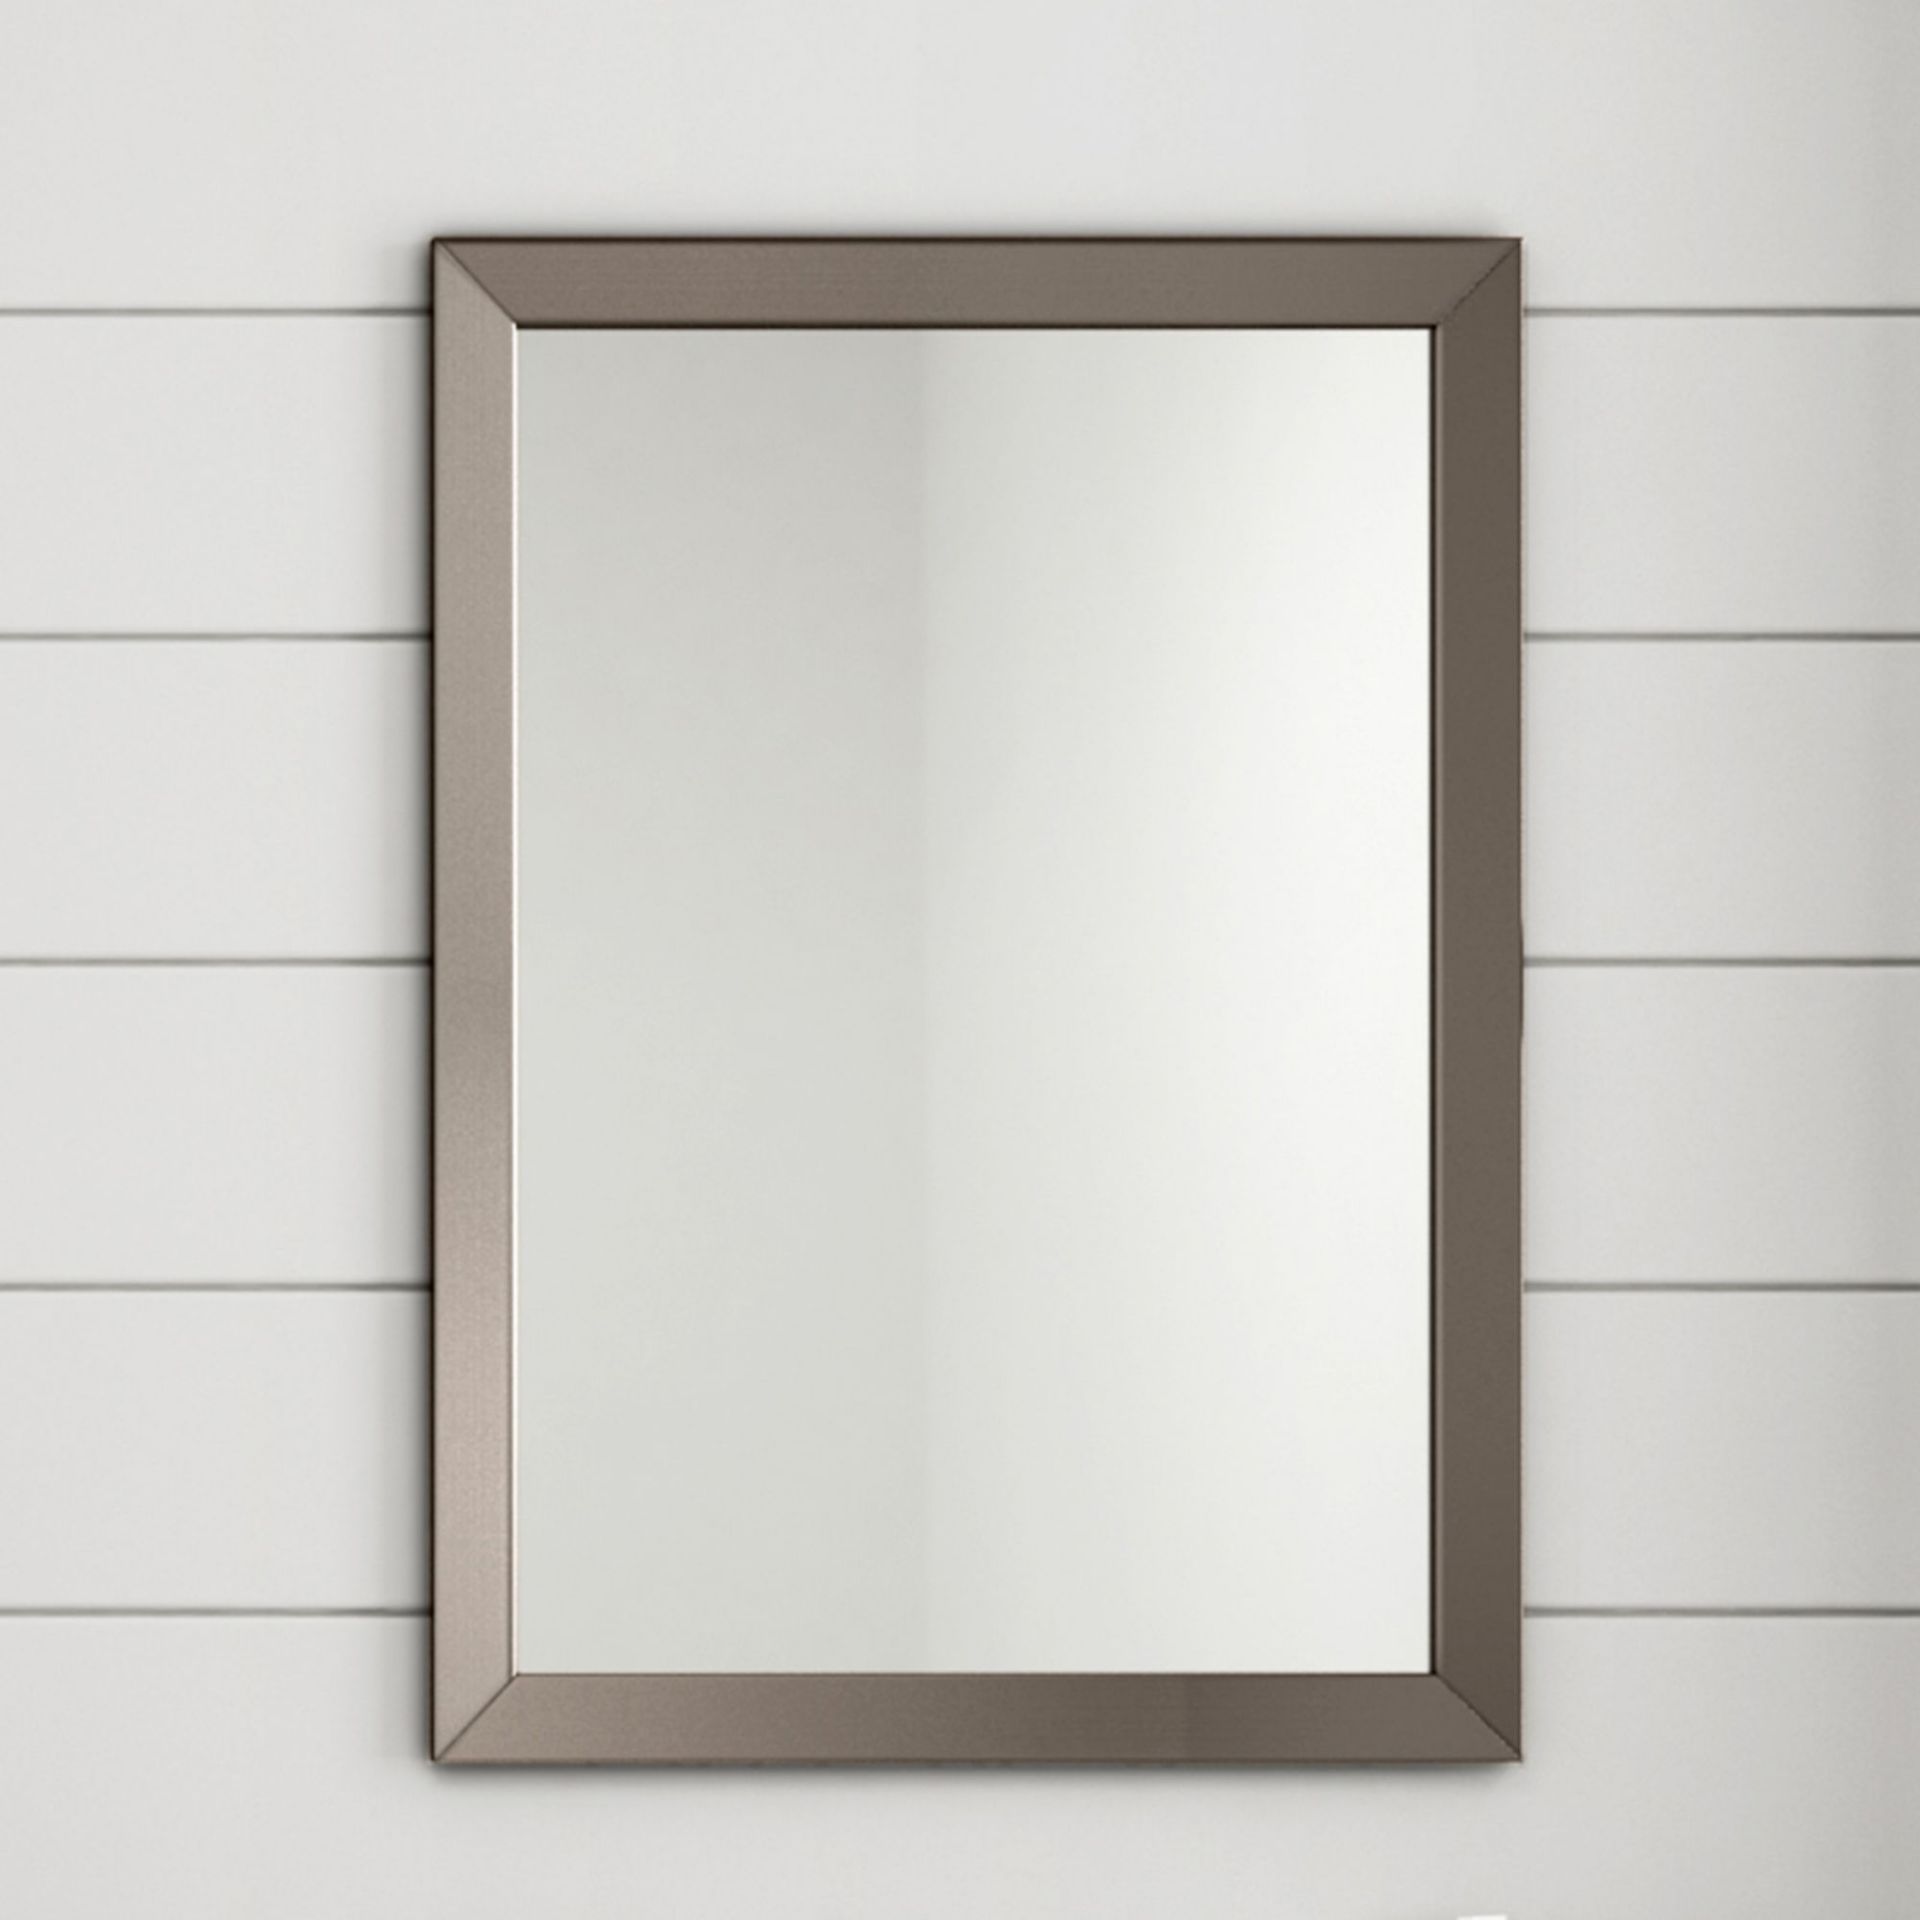 (QP178) 500x700mm Clover Metallic Nickel Framed Mirror Made from eco friendly recycled plastic... (